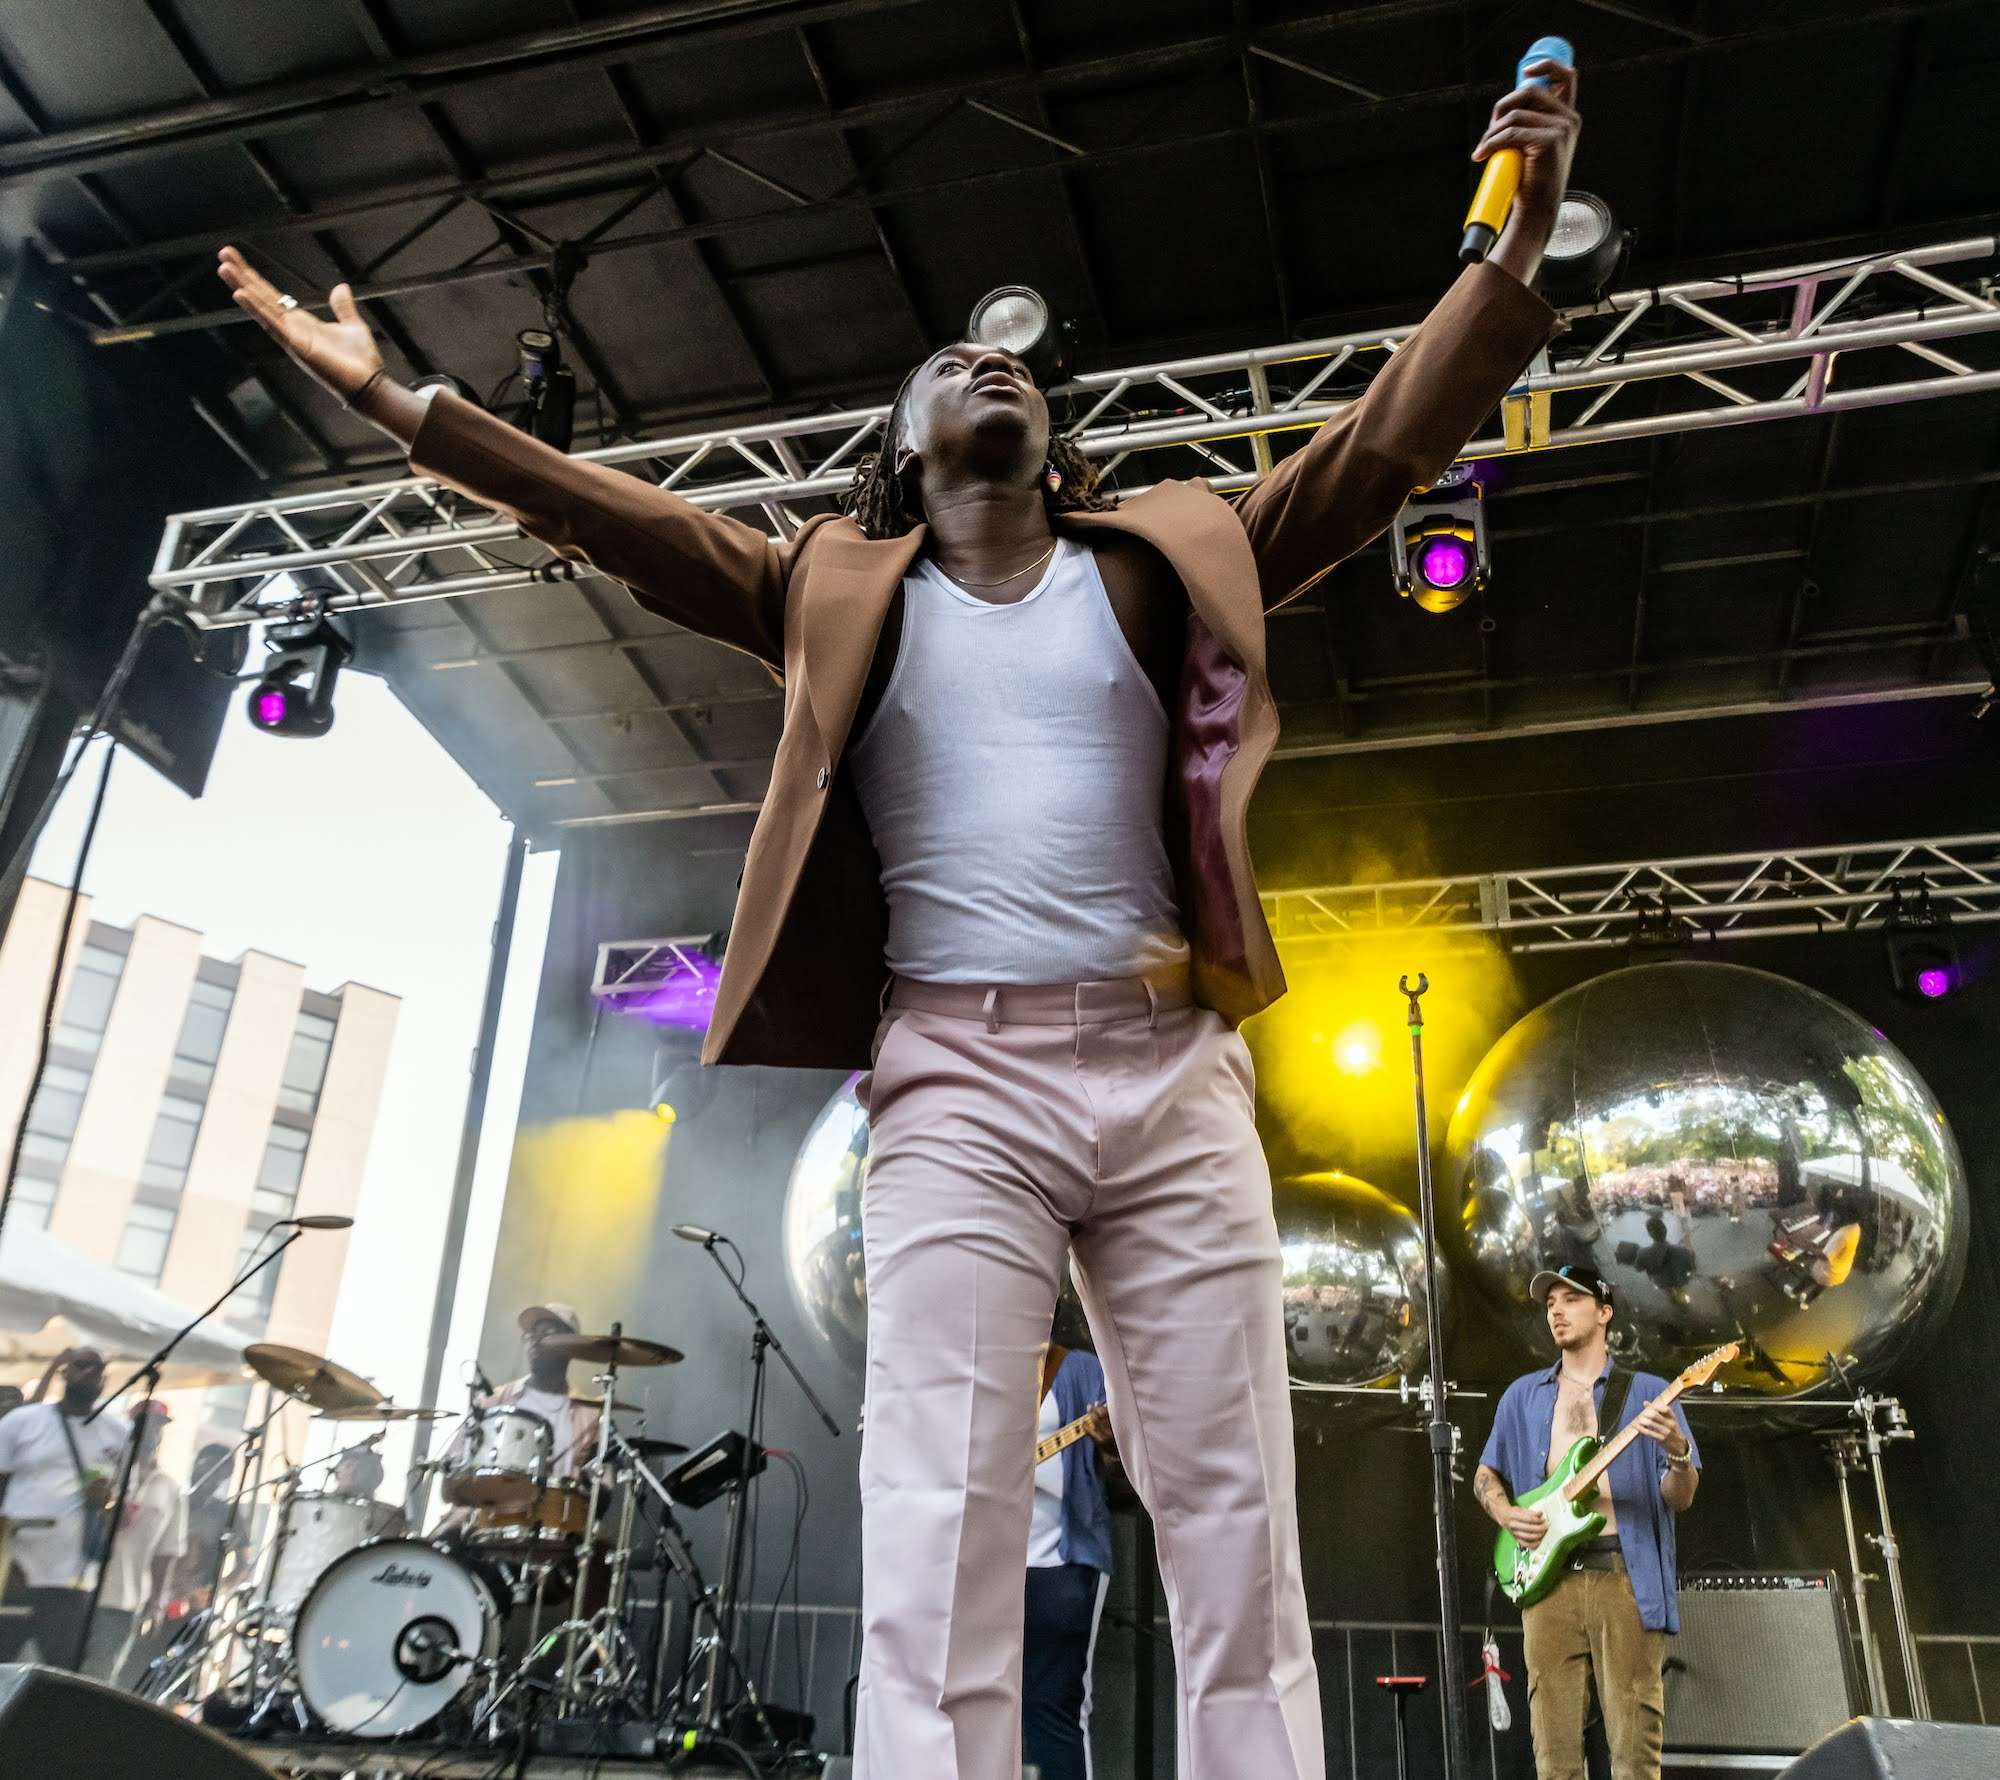 Ric Wilson Live At Pitchfork [GALLERY] 4